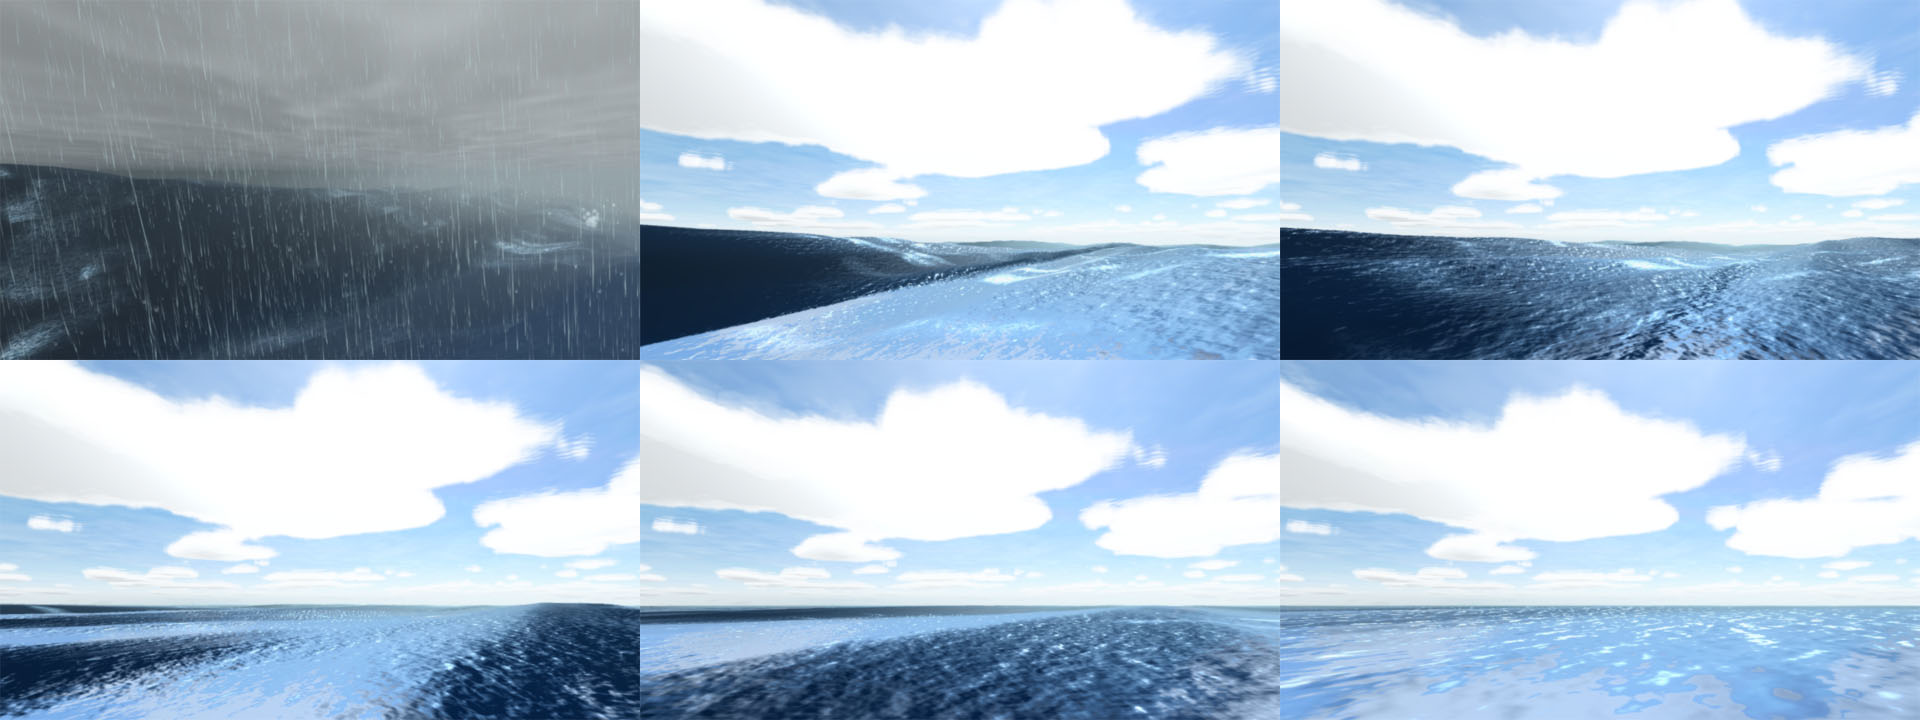 Ocean waves. Ocean waves in the new shader, varying from sunny and peaceful to rough and frightening.